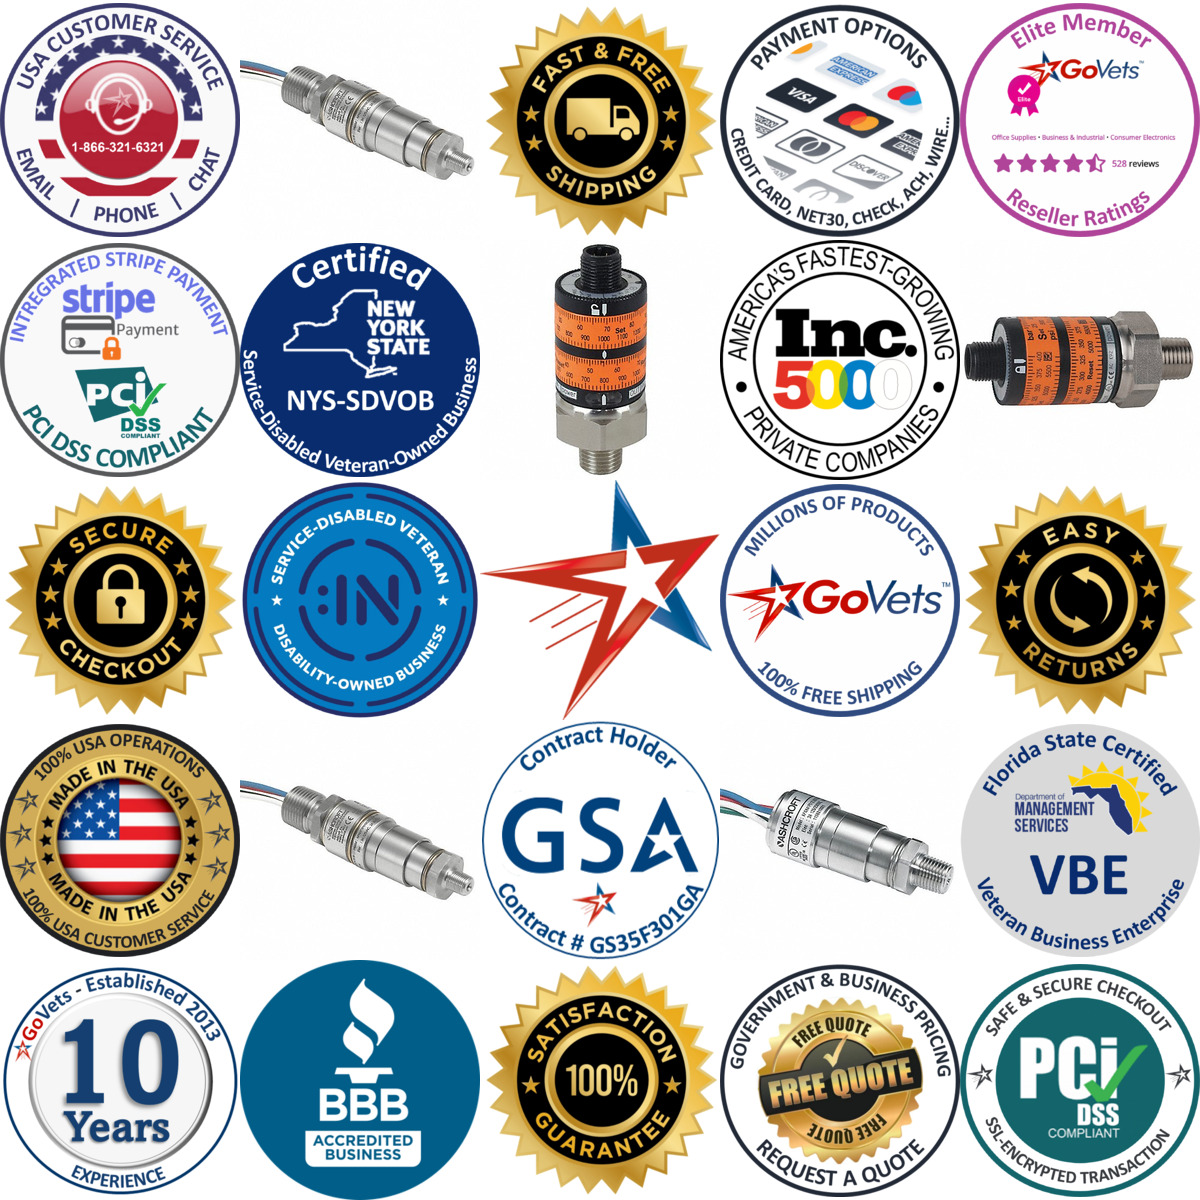 A selection of Miniature Pressure Switches products on GoVets